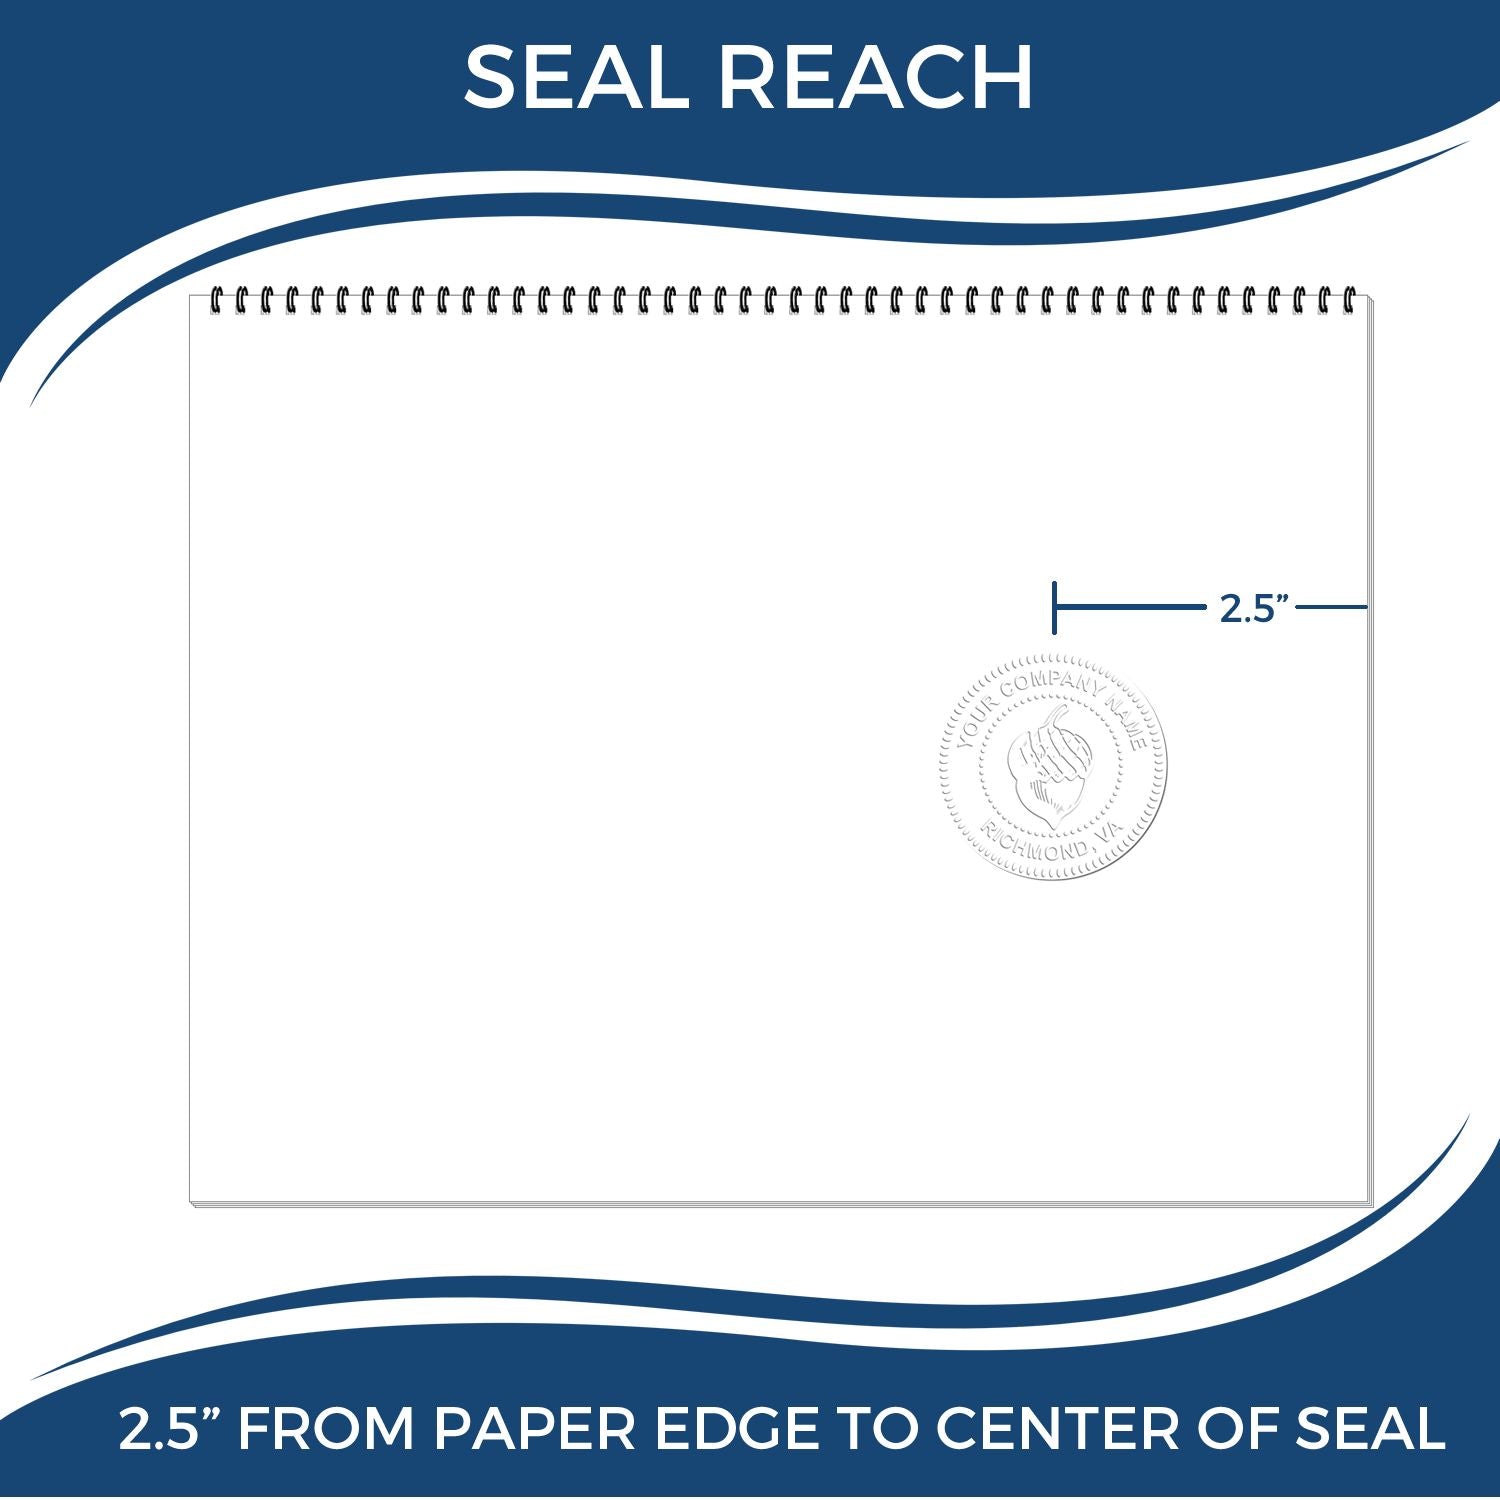 An infographic showing the seal reach which is represented by a ruler and a miniature seal image of the Long Reach Kentucky Land Surveyor Seal